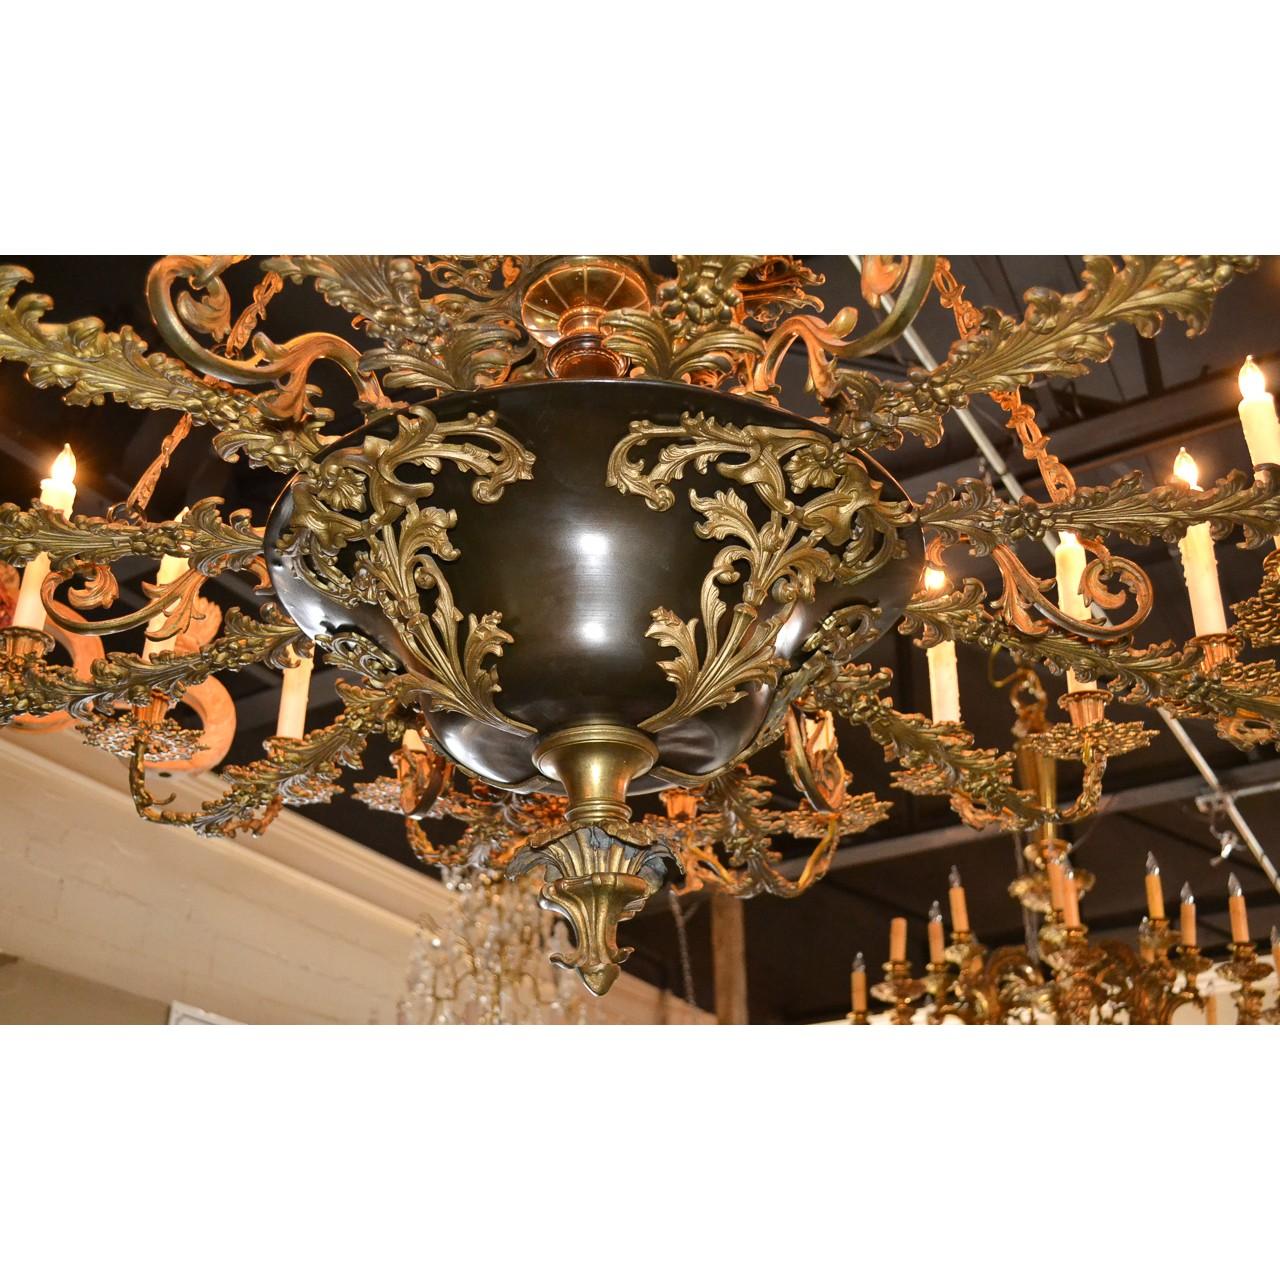 Extraordinary 19th century French bronze twenty-four light chandelier of paragon quality. The bronze scrolling leaf and shell designed canopy holding chains of intertwined vines above finely cast bronze foliate motif arms with leaf spray bobeche.